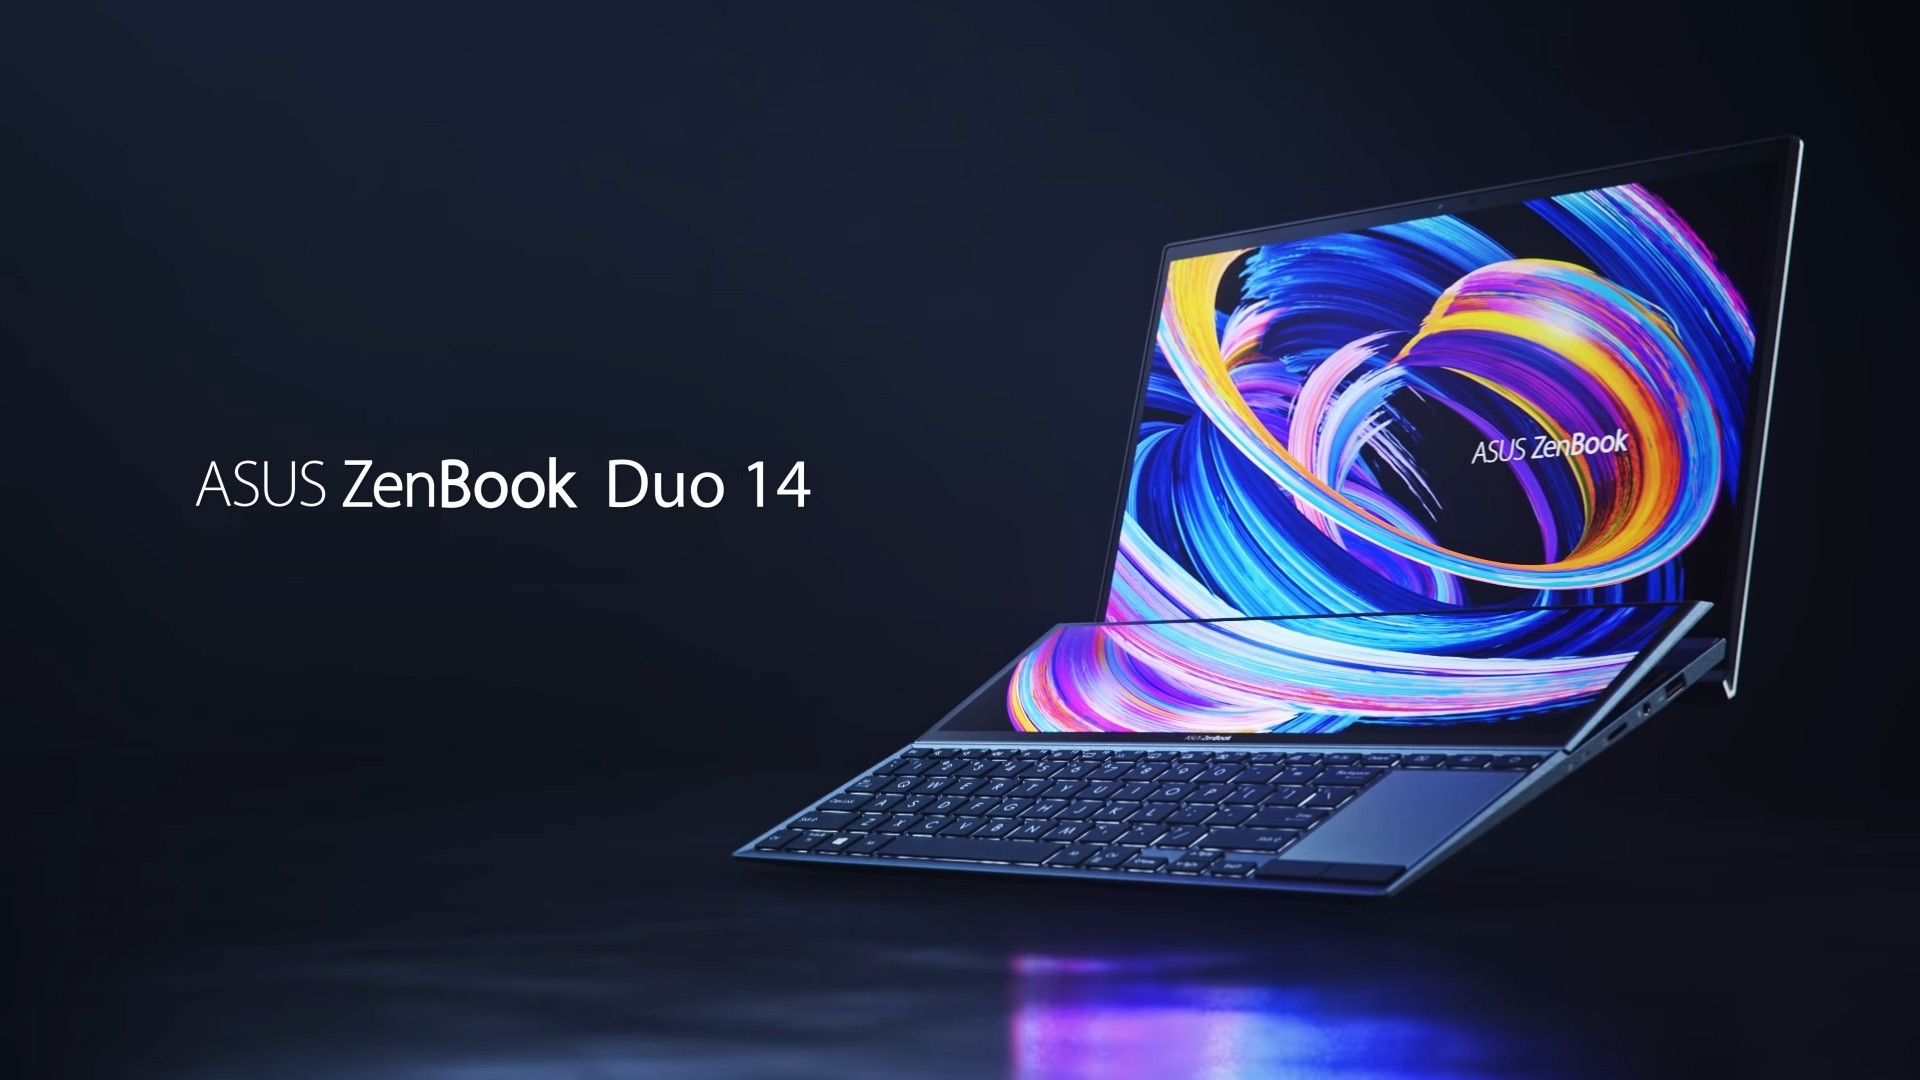 ASUS ZenBook Duo 14 Laptop is getting a $200 discount